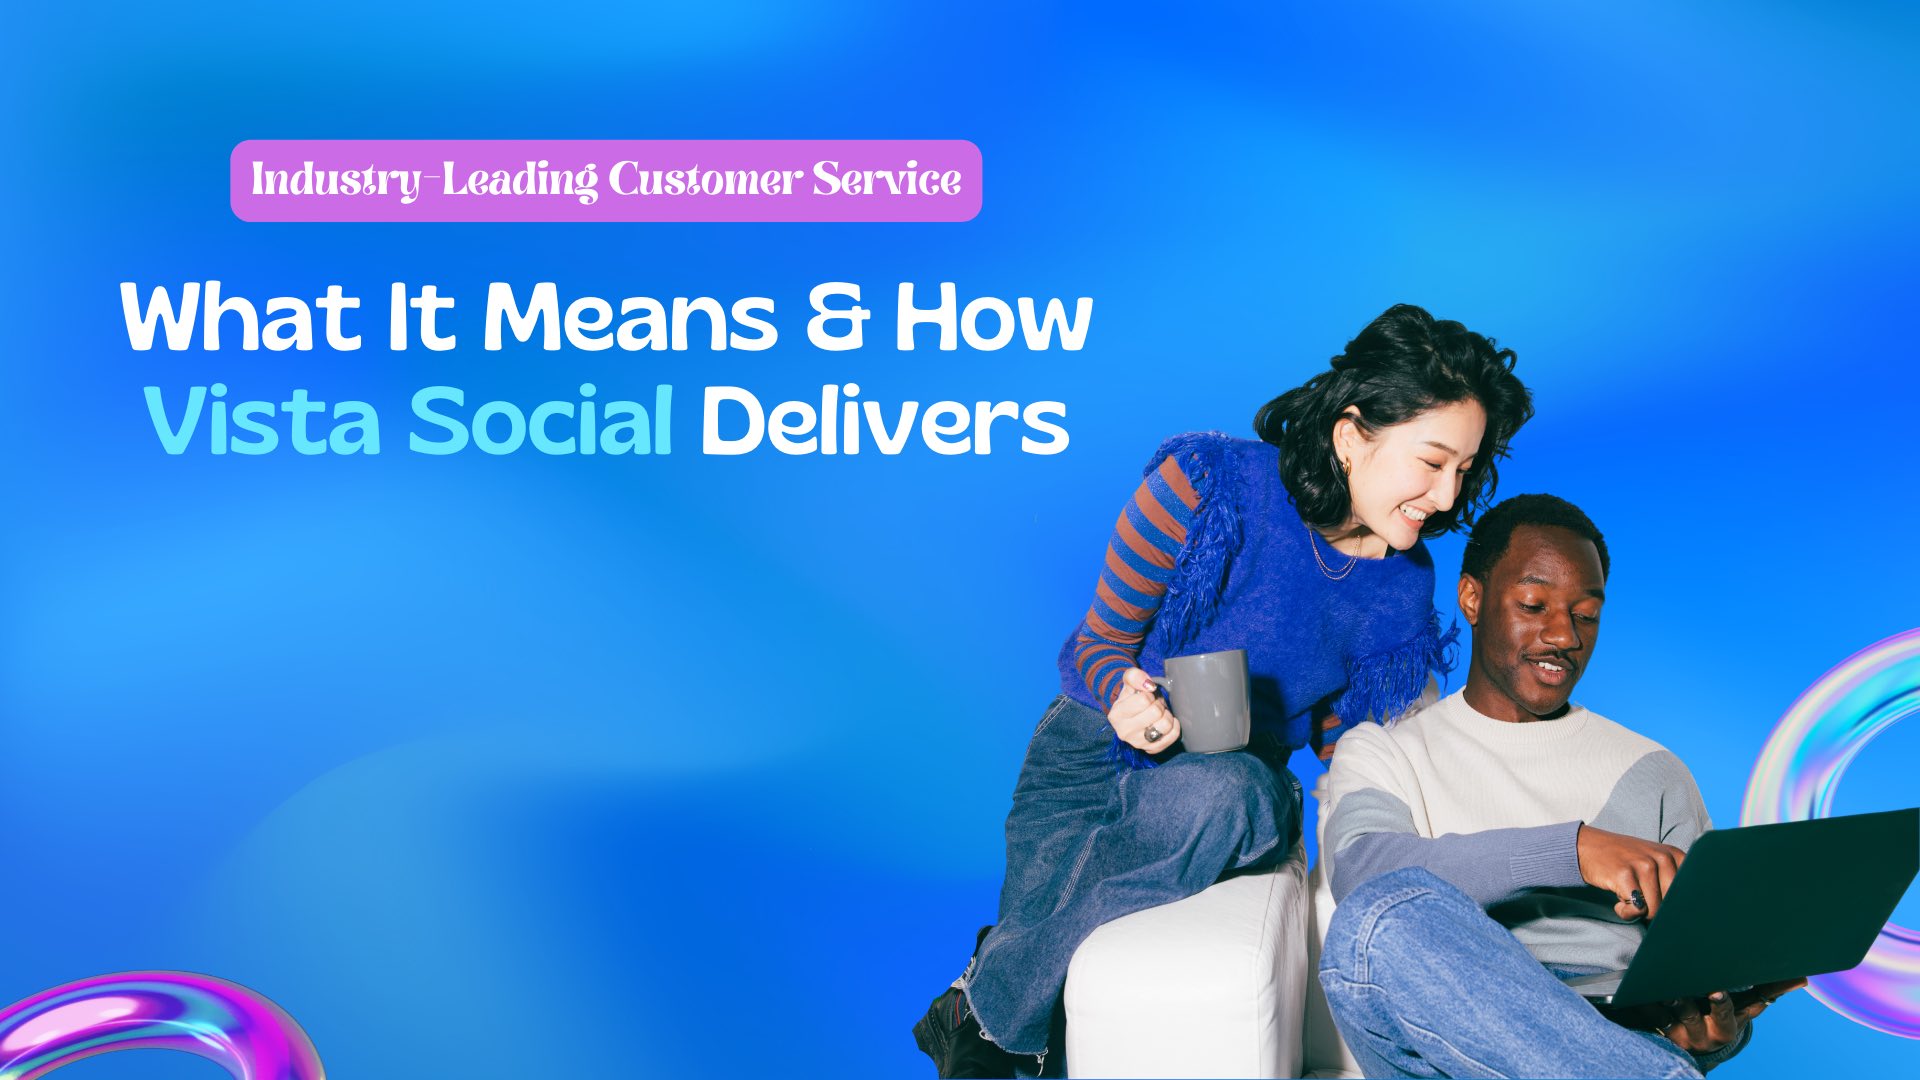 Industry-Leading Customer Service: What It Means and How Vista Social Delivers